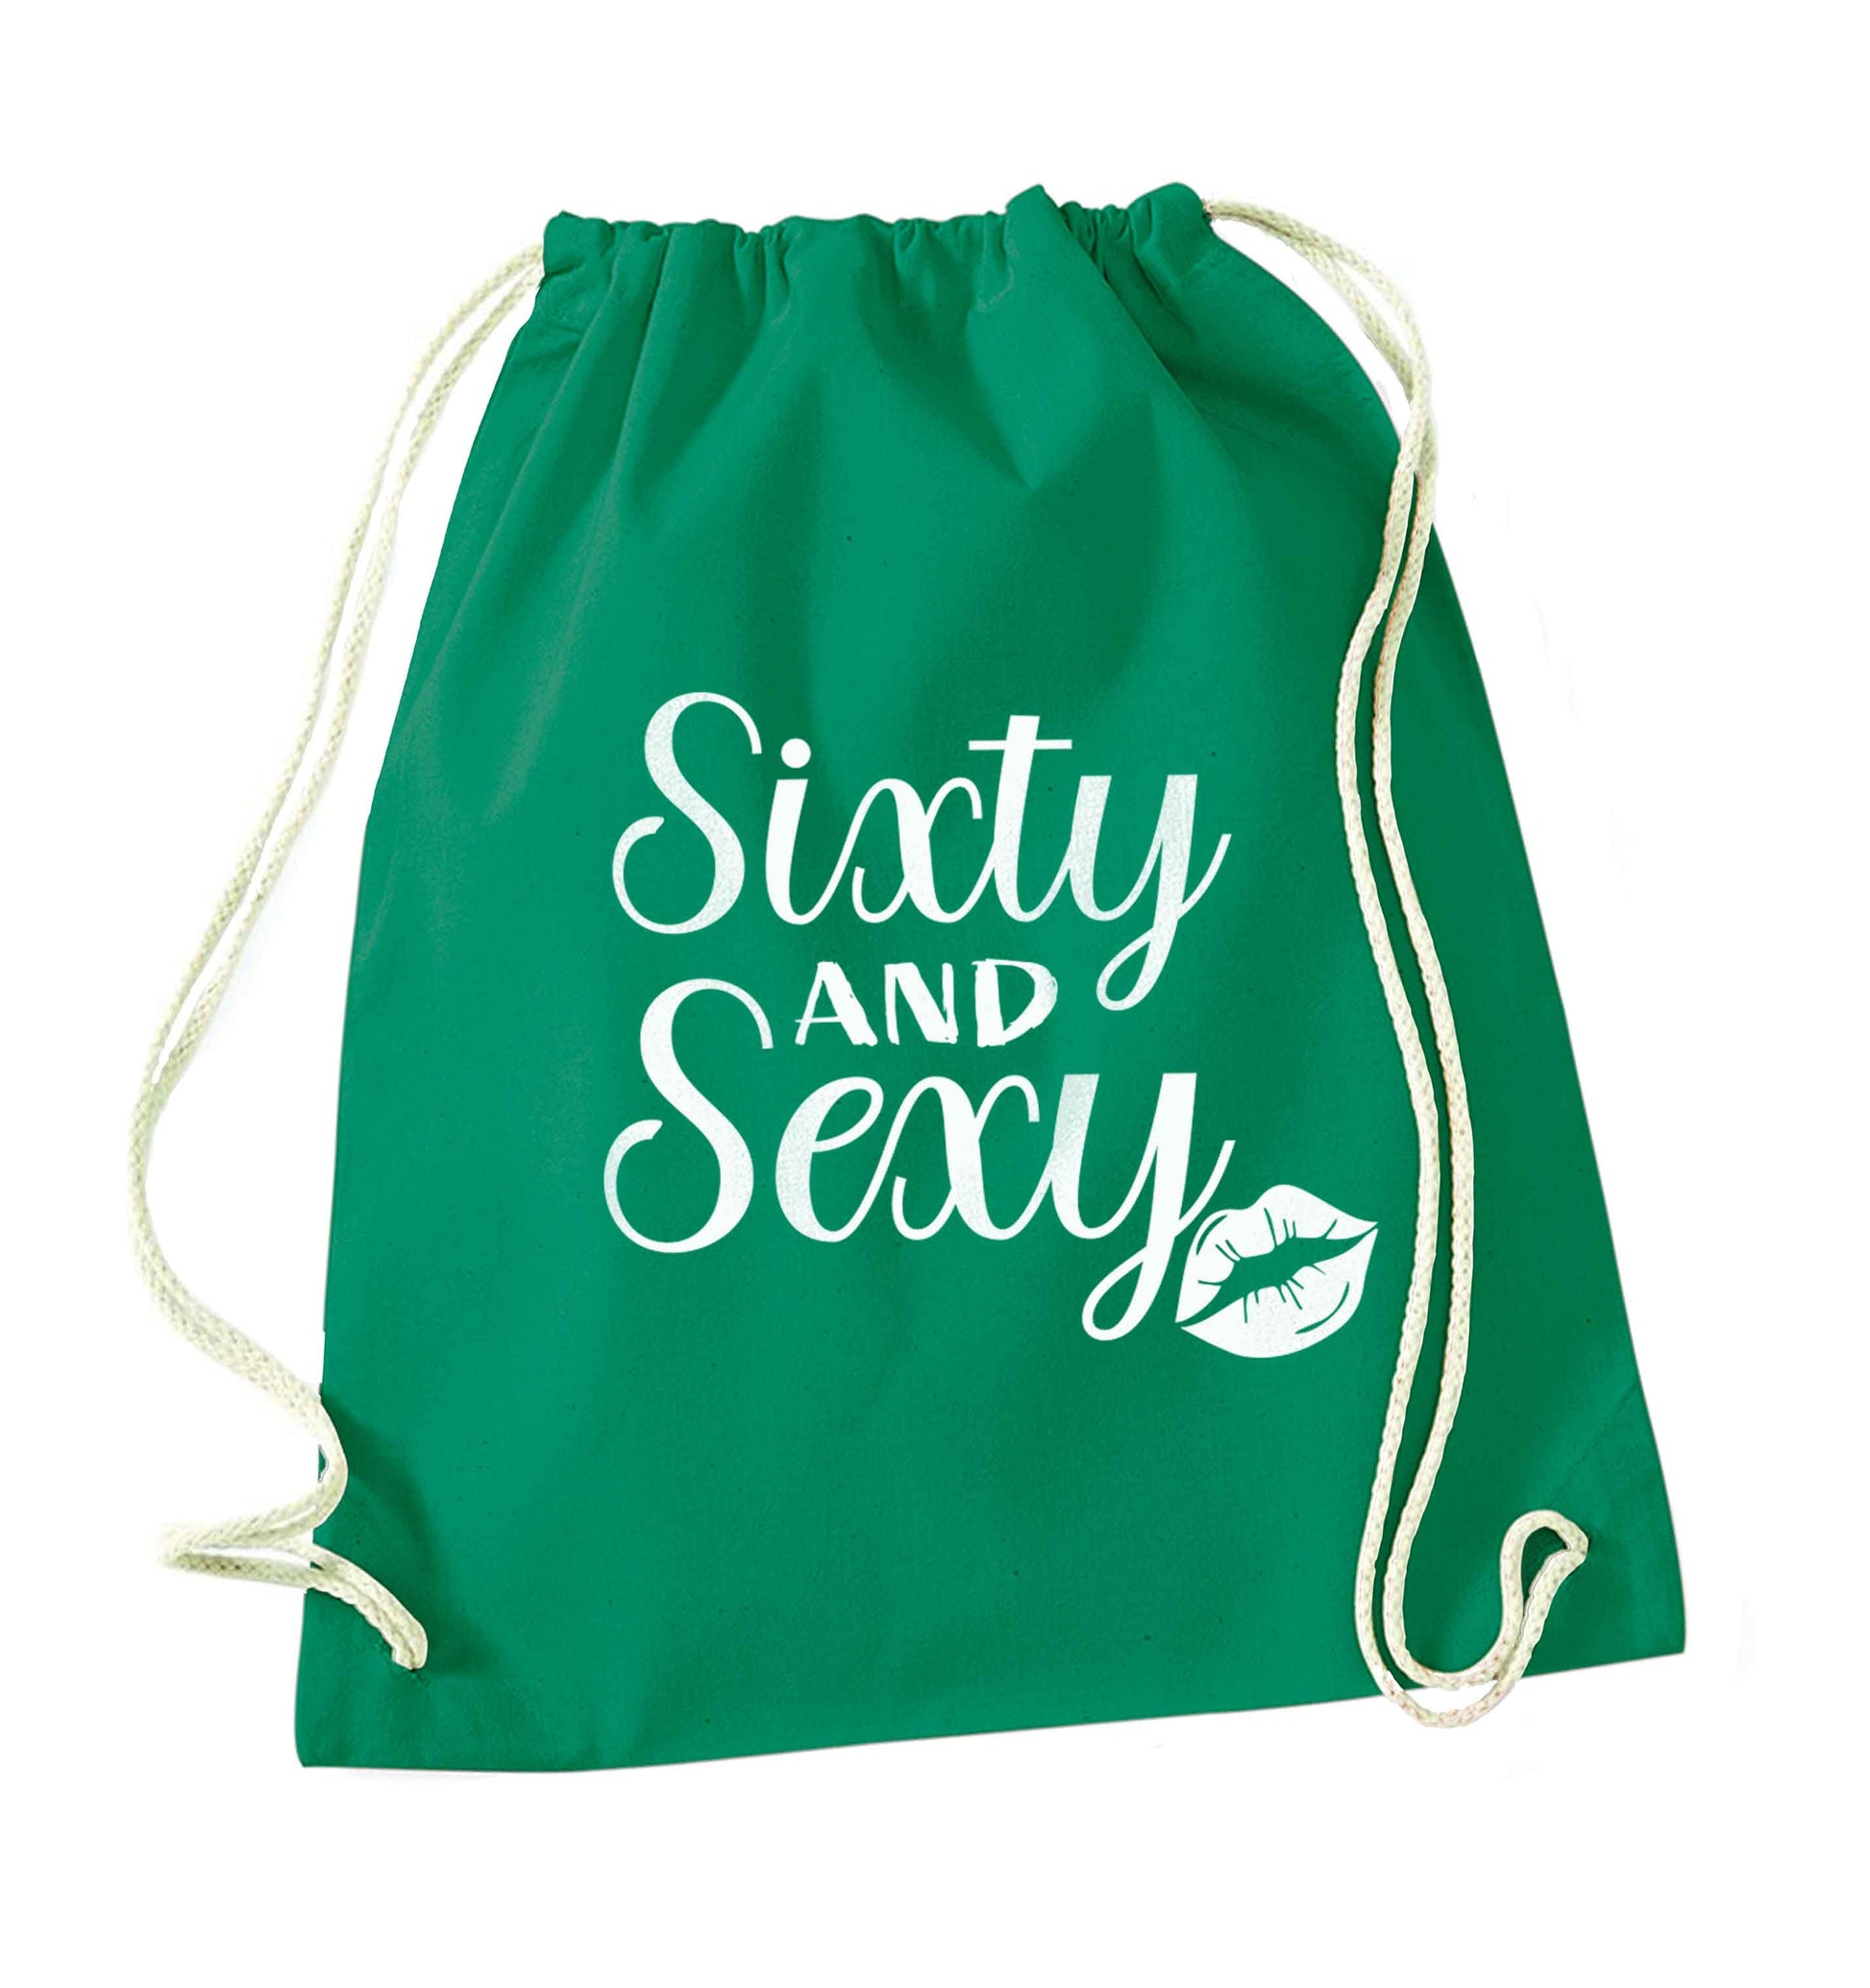 Sixty and sexy green drawstring bag